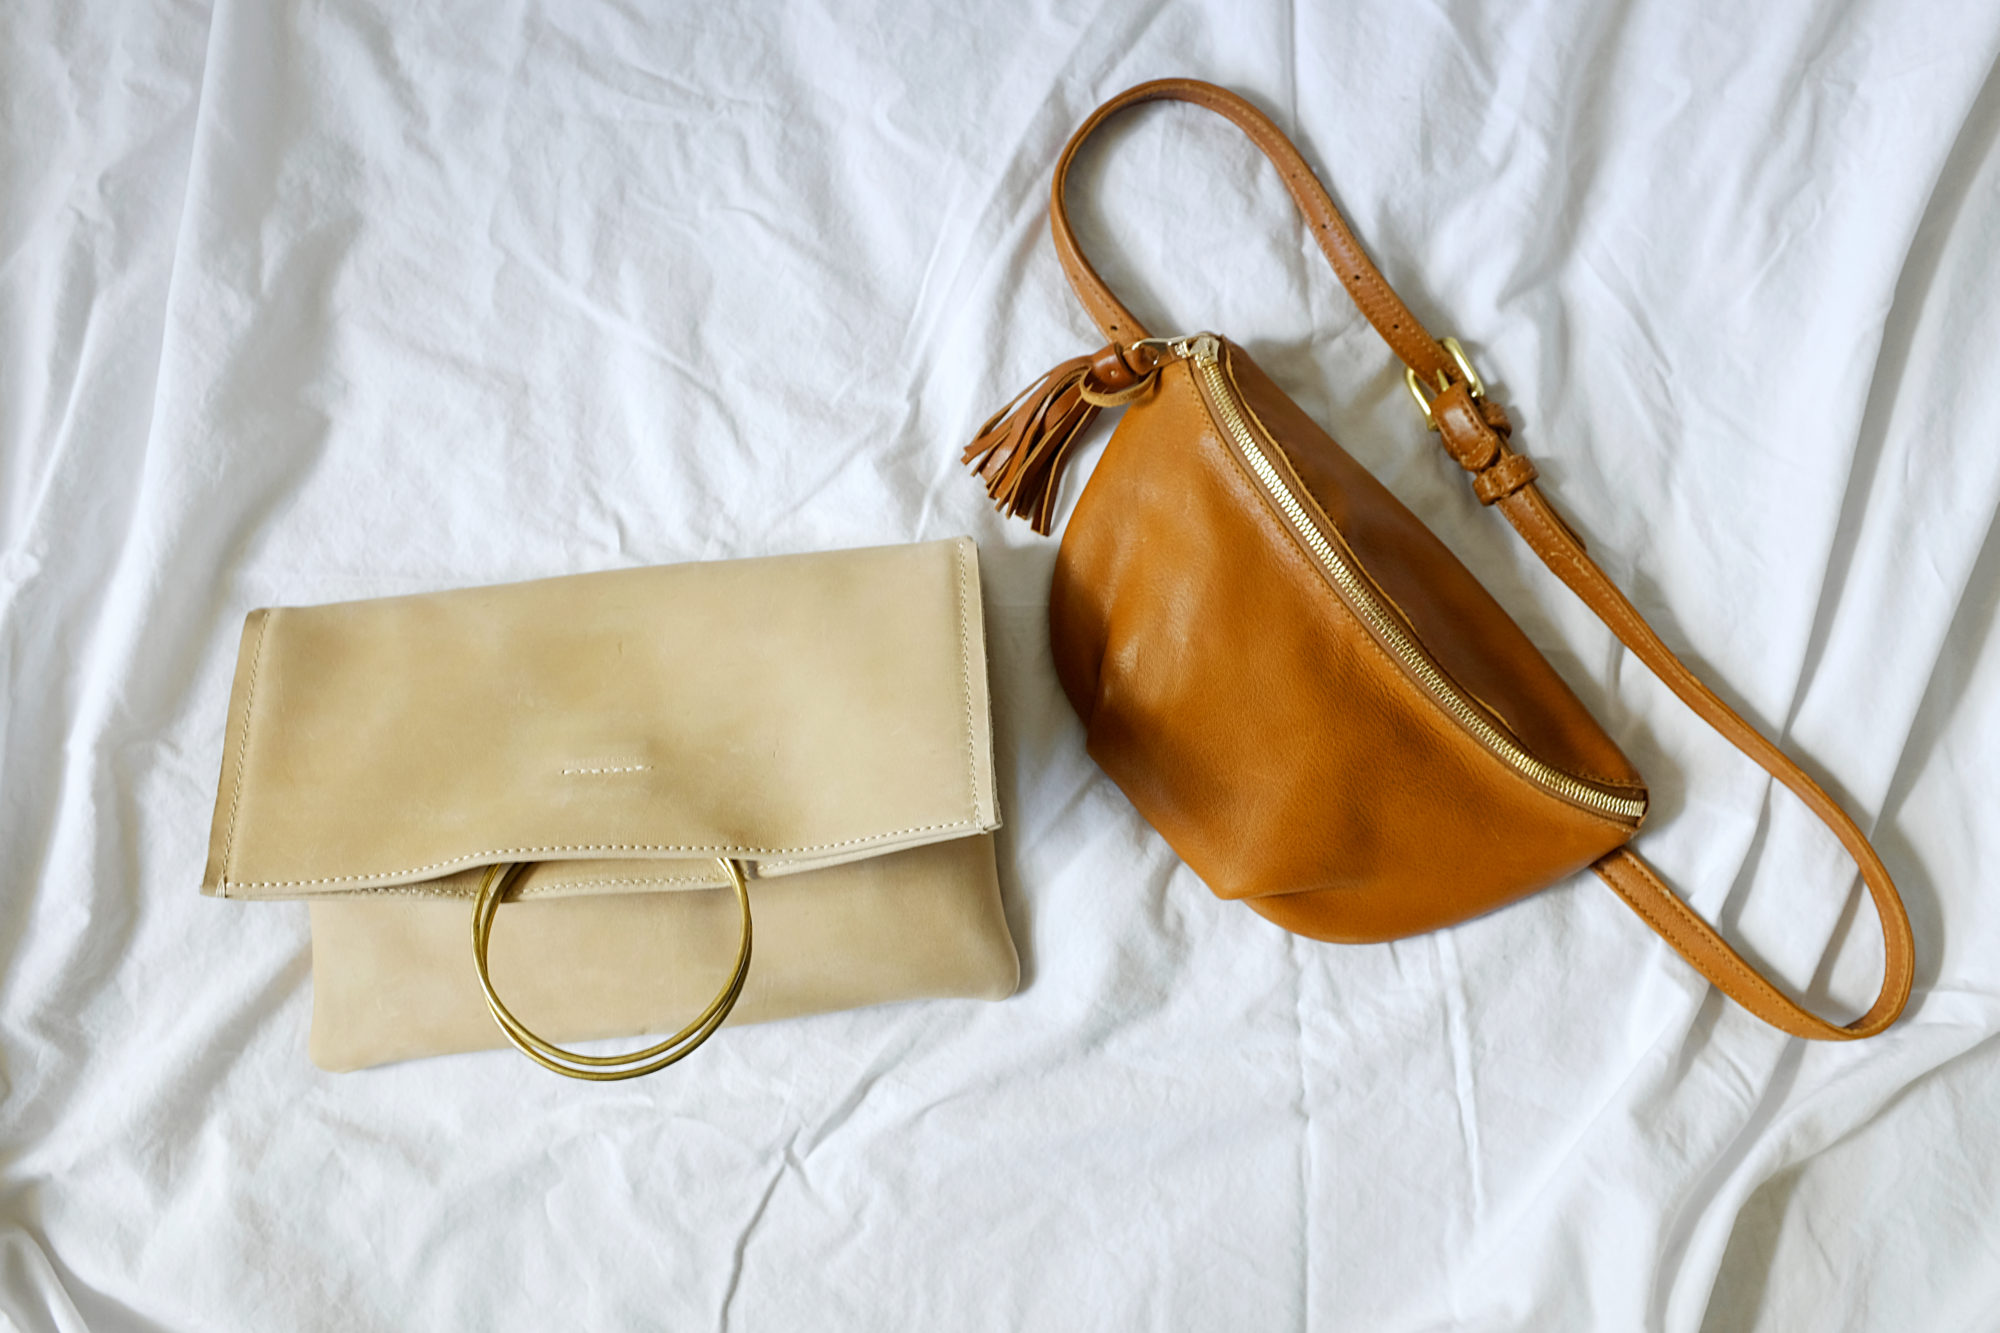 The Nyala Foldover Clutch and Soto Belt Bag on a white textile background